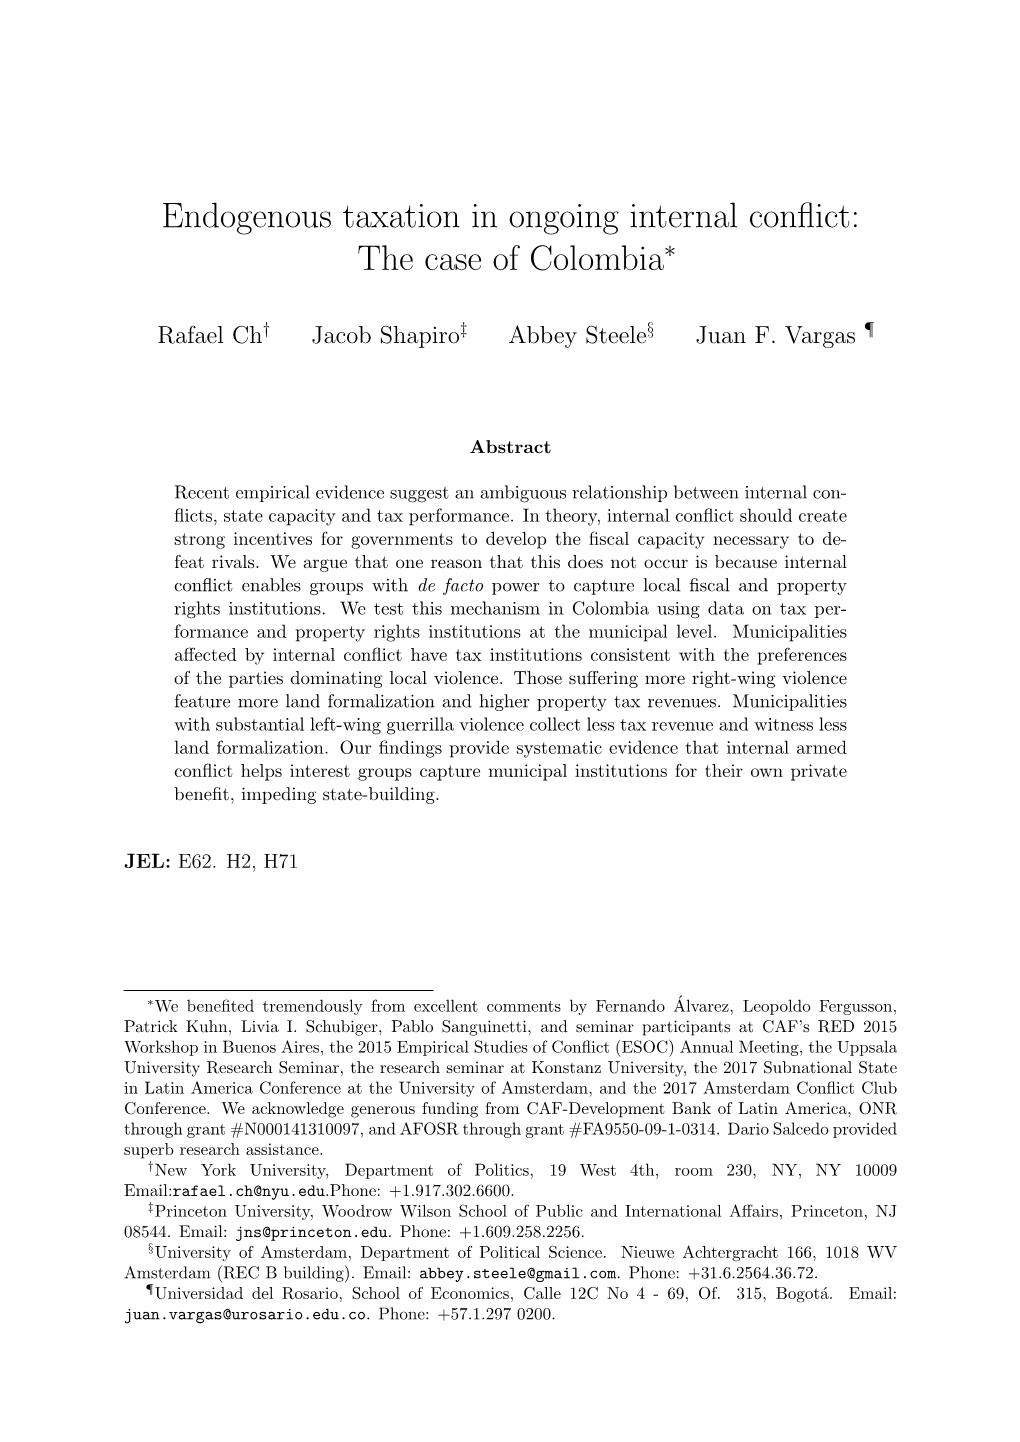 Endogenous Taxation in Ongoing Internal Conflict: the Case of Colombia